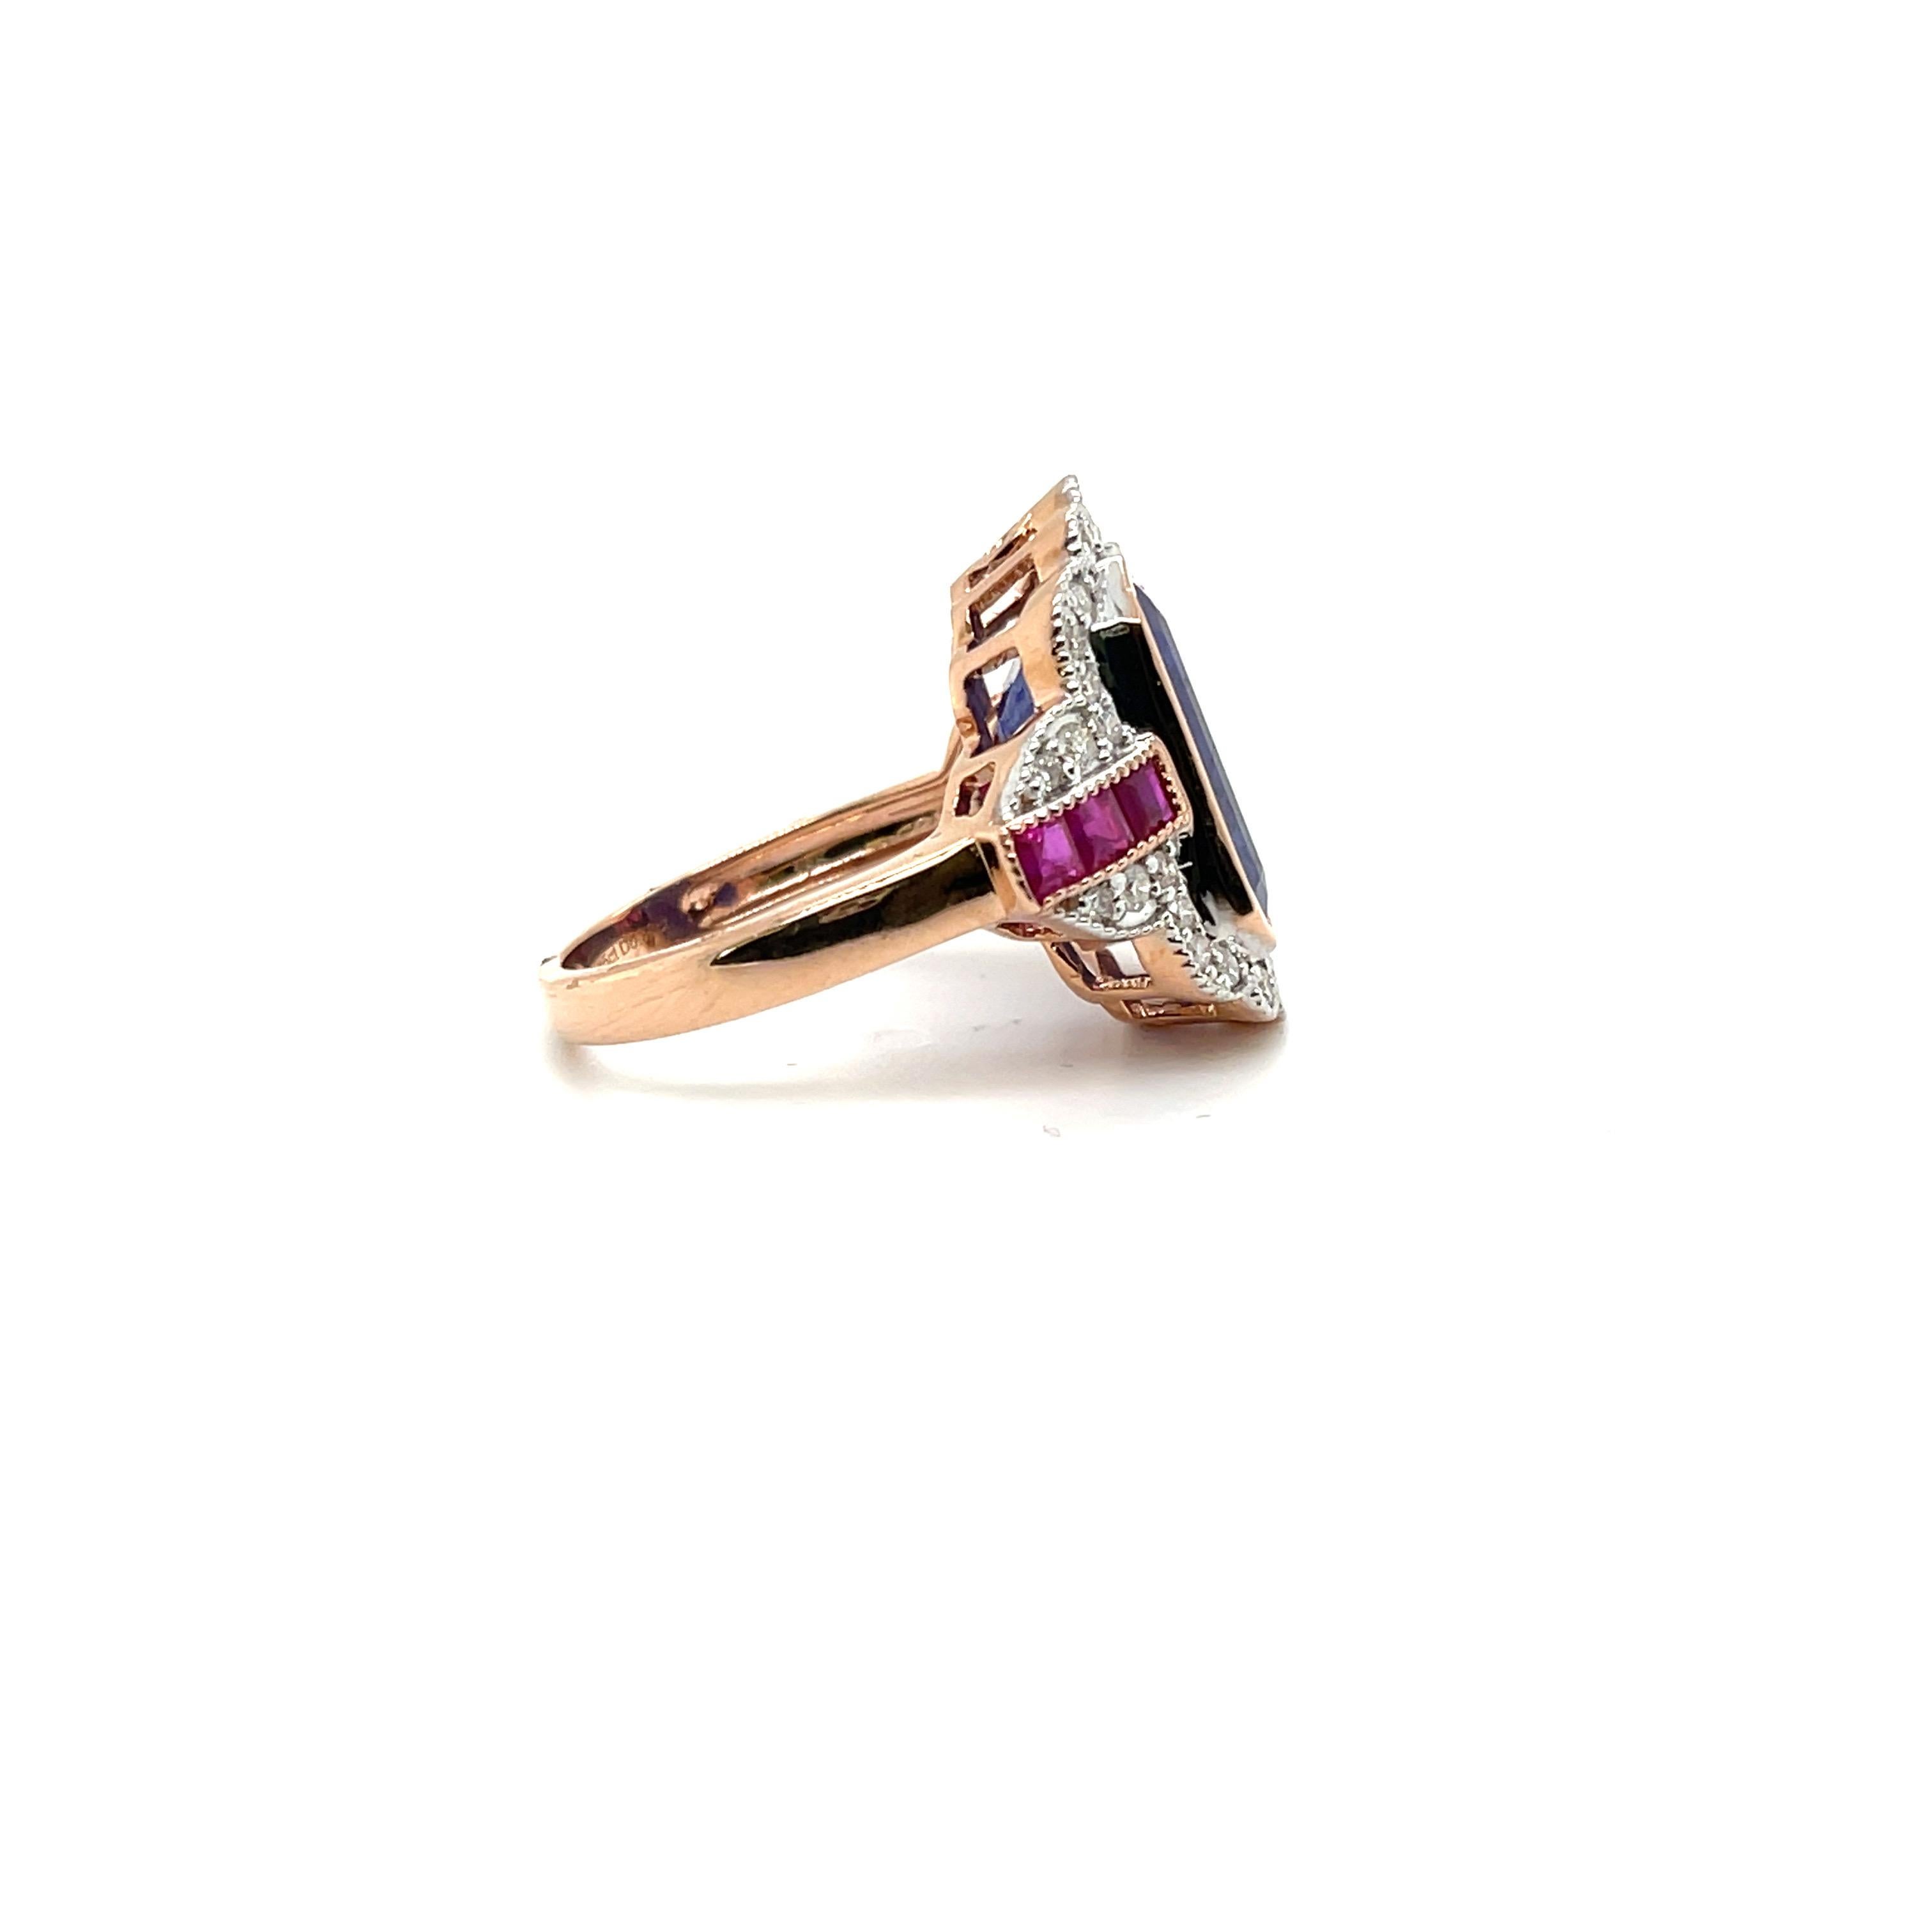 anzanite, Rubies and Diamonds, beautifully crafted in fourteen karat rose gold, complimented by a stunning polished finish design. 

 Item 1
One ladies - 14ct rose gold dress ring, narrow, low half round, tapered shank with open
back bezel setting